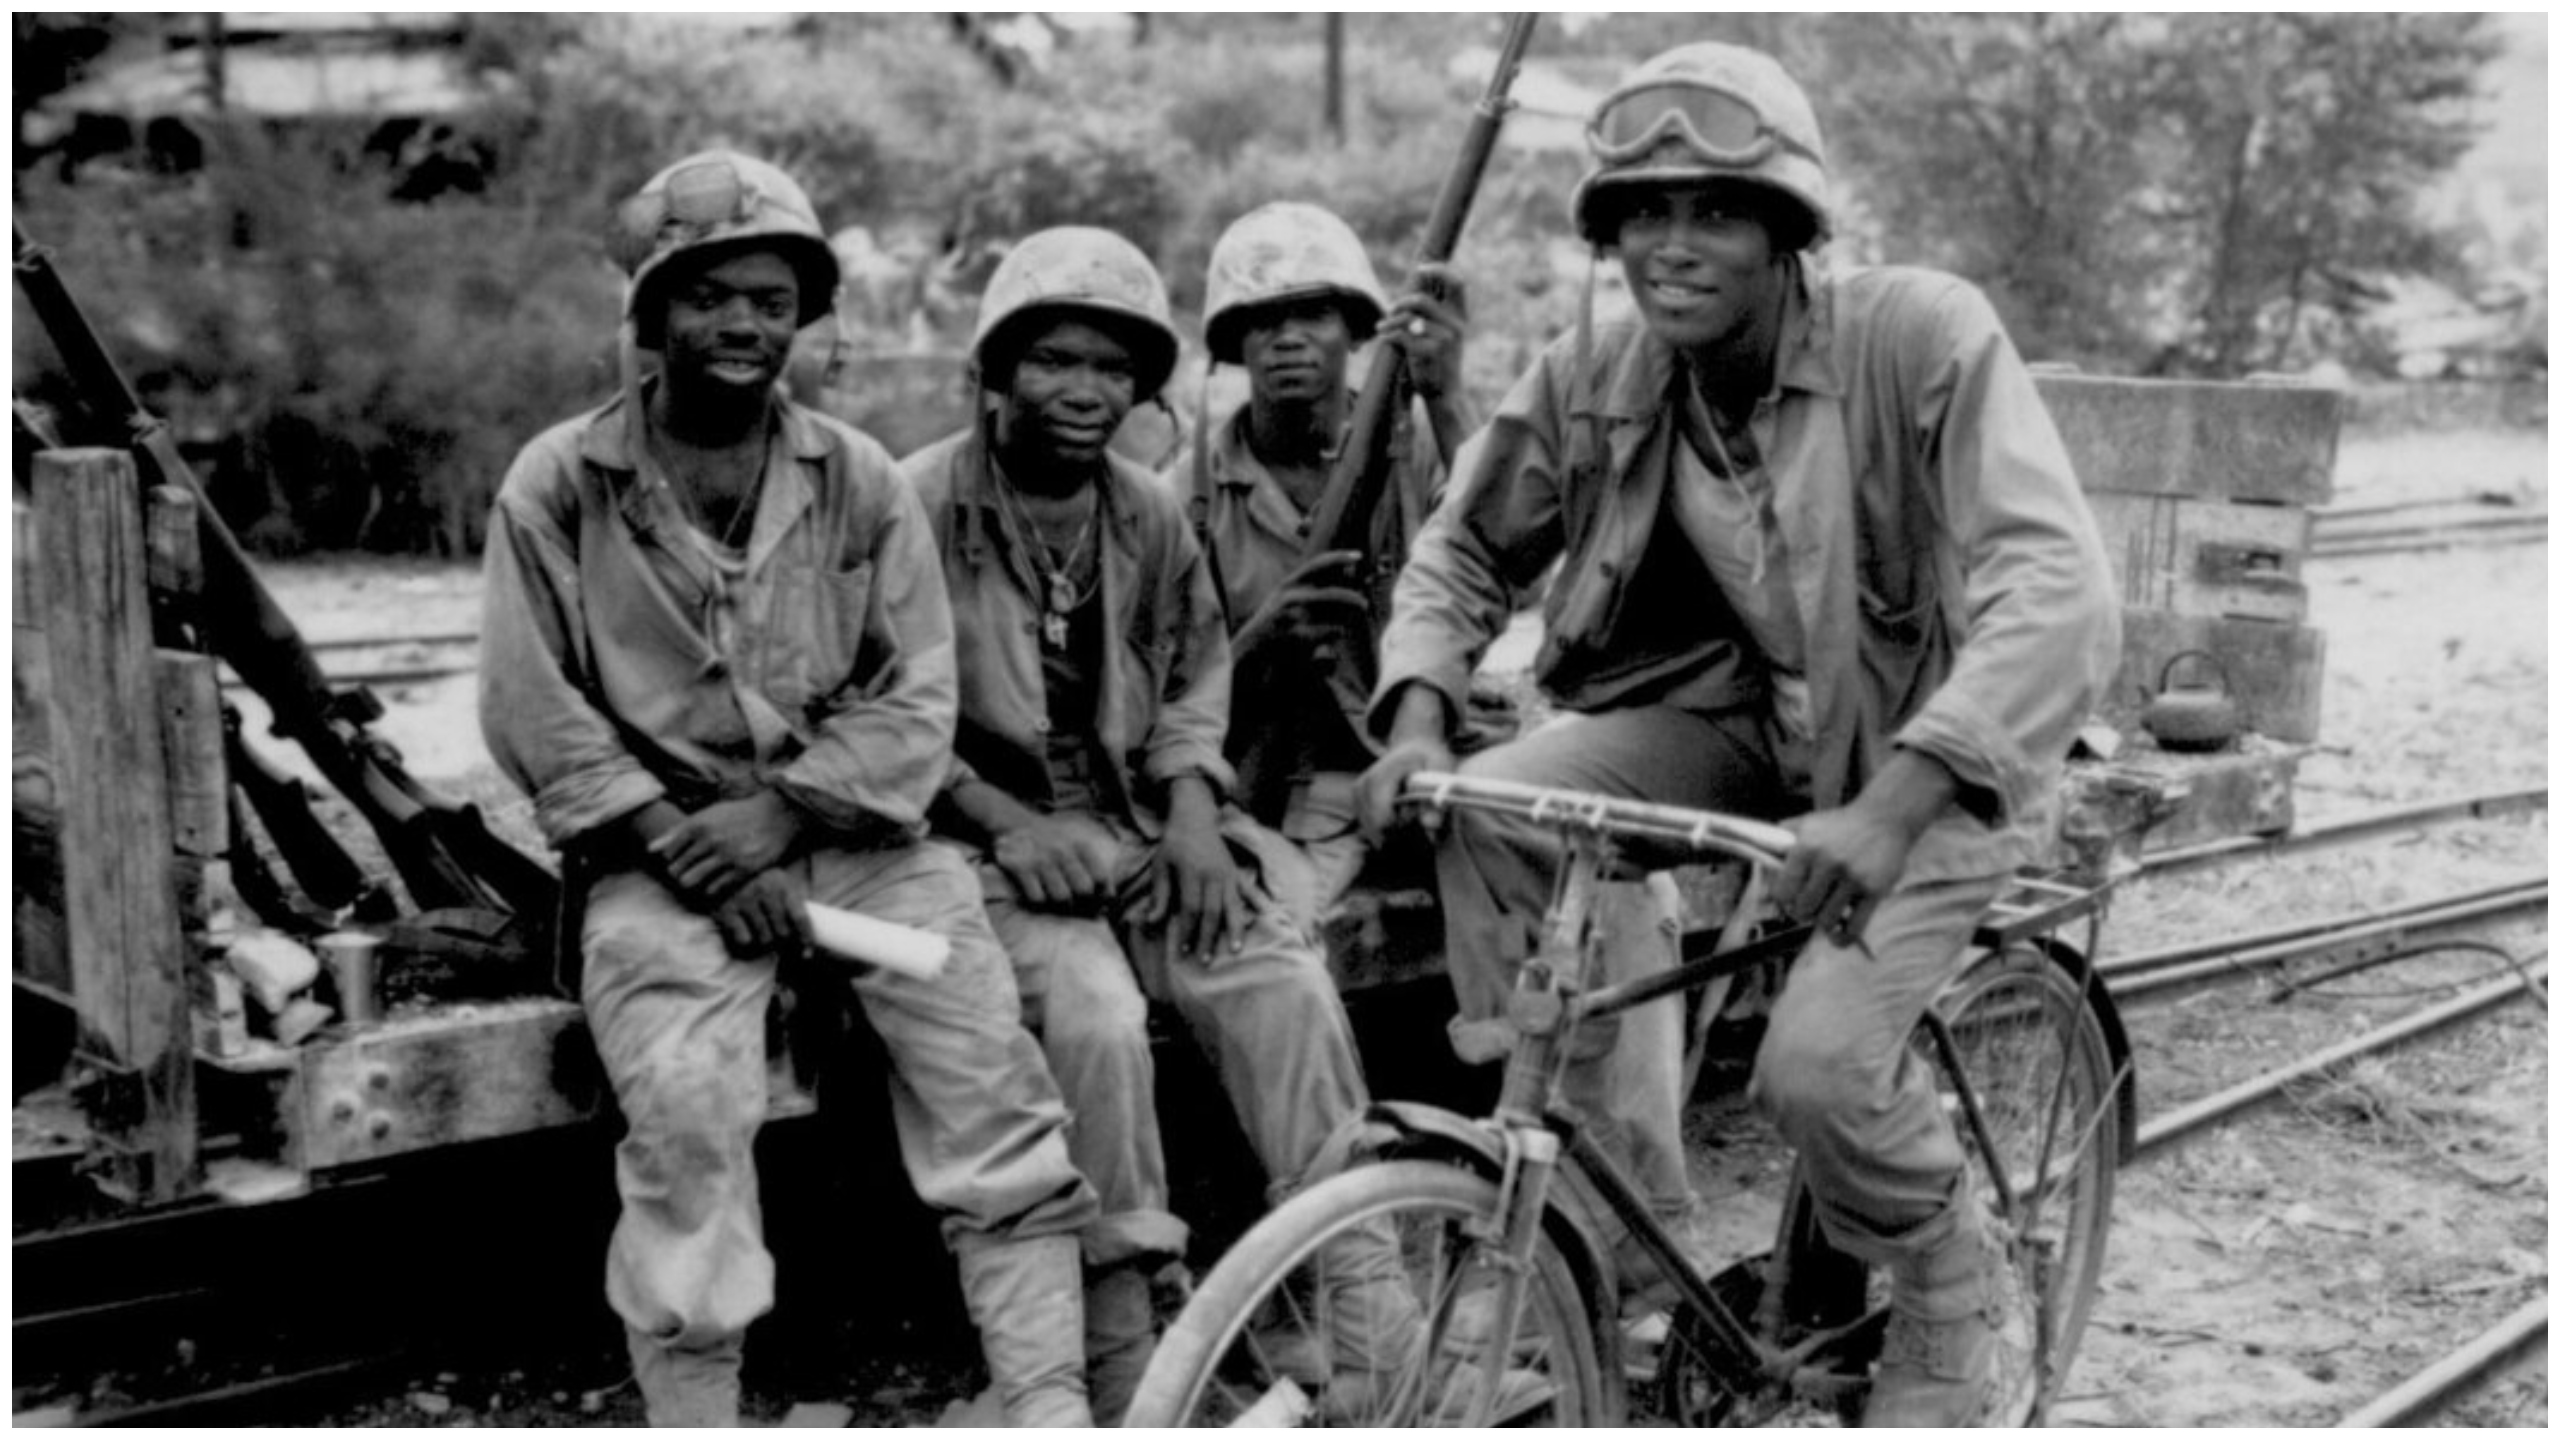 The Historic Story Of The Montford Point Marines Who Were The First African Americans In The U.S. Marine Corps